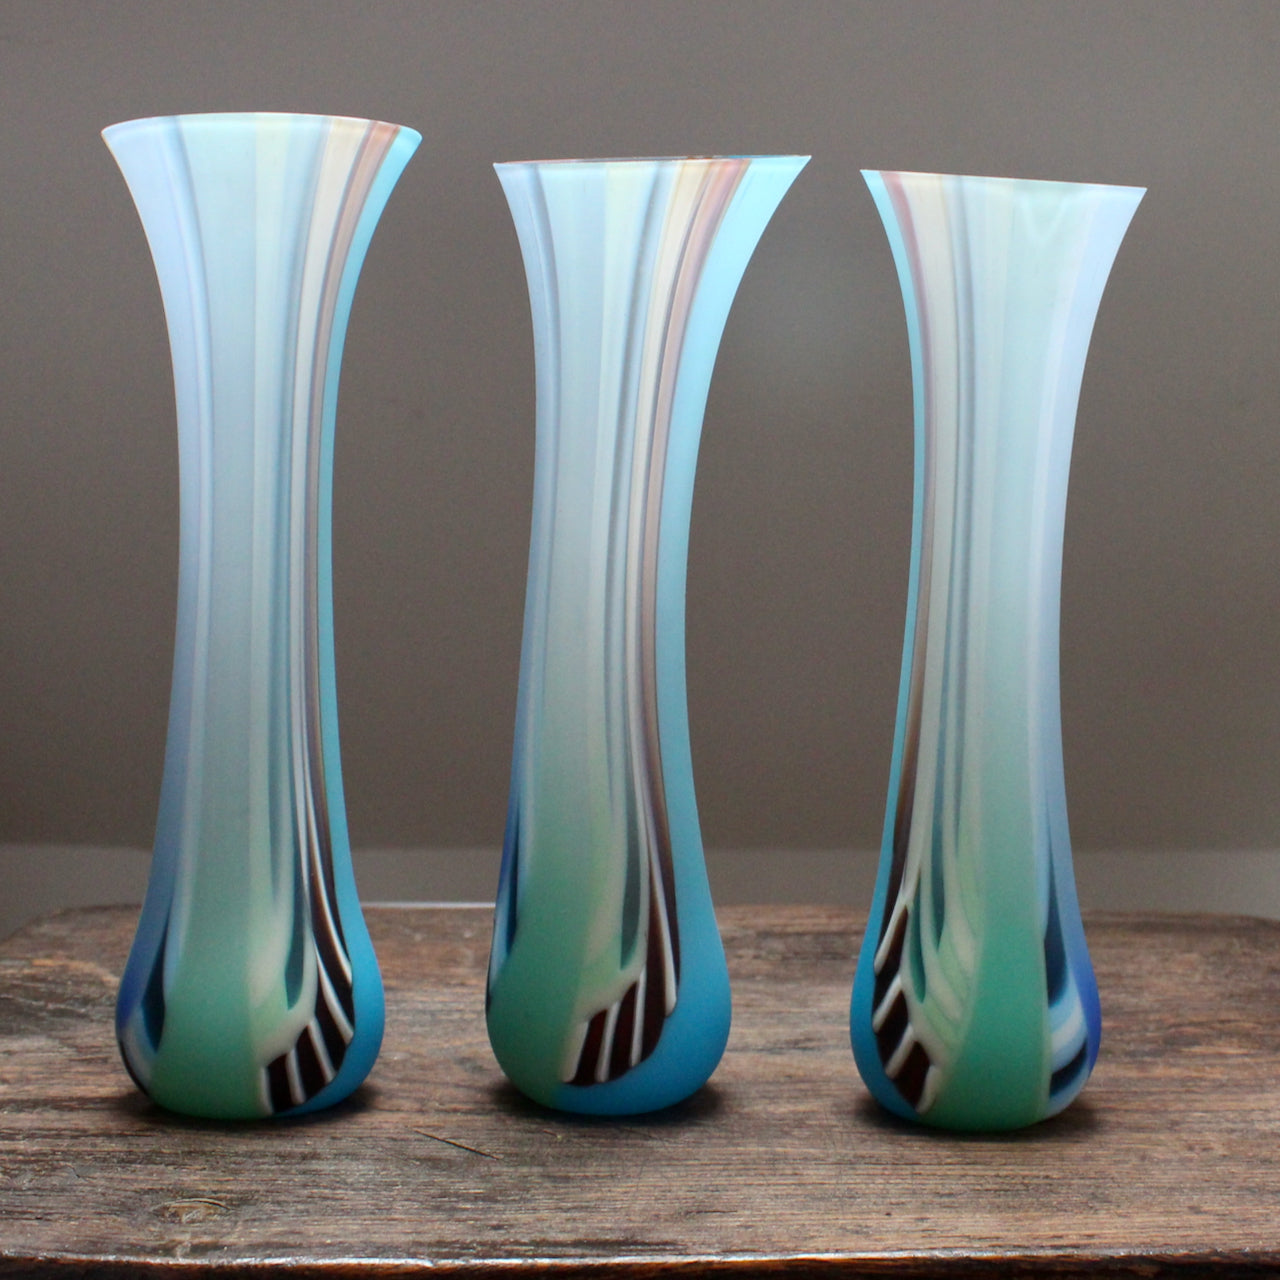 three multi-coloured glass vases on a wooden table